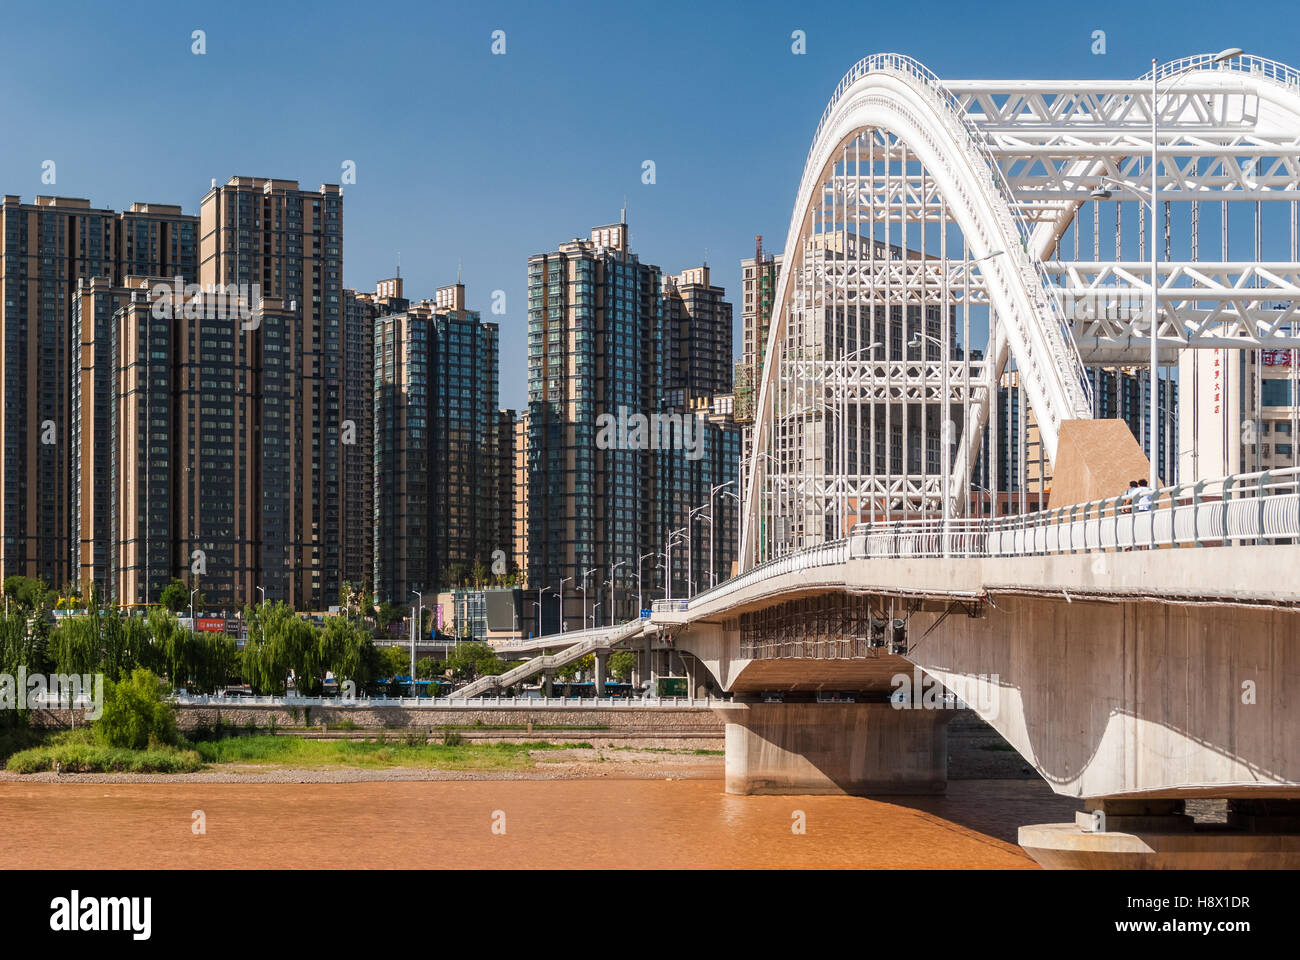 The Yuantong Bridge over the Yellow River in Lanzhou (China) Stock Photo